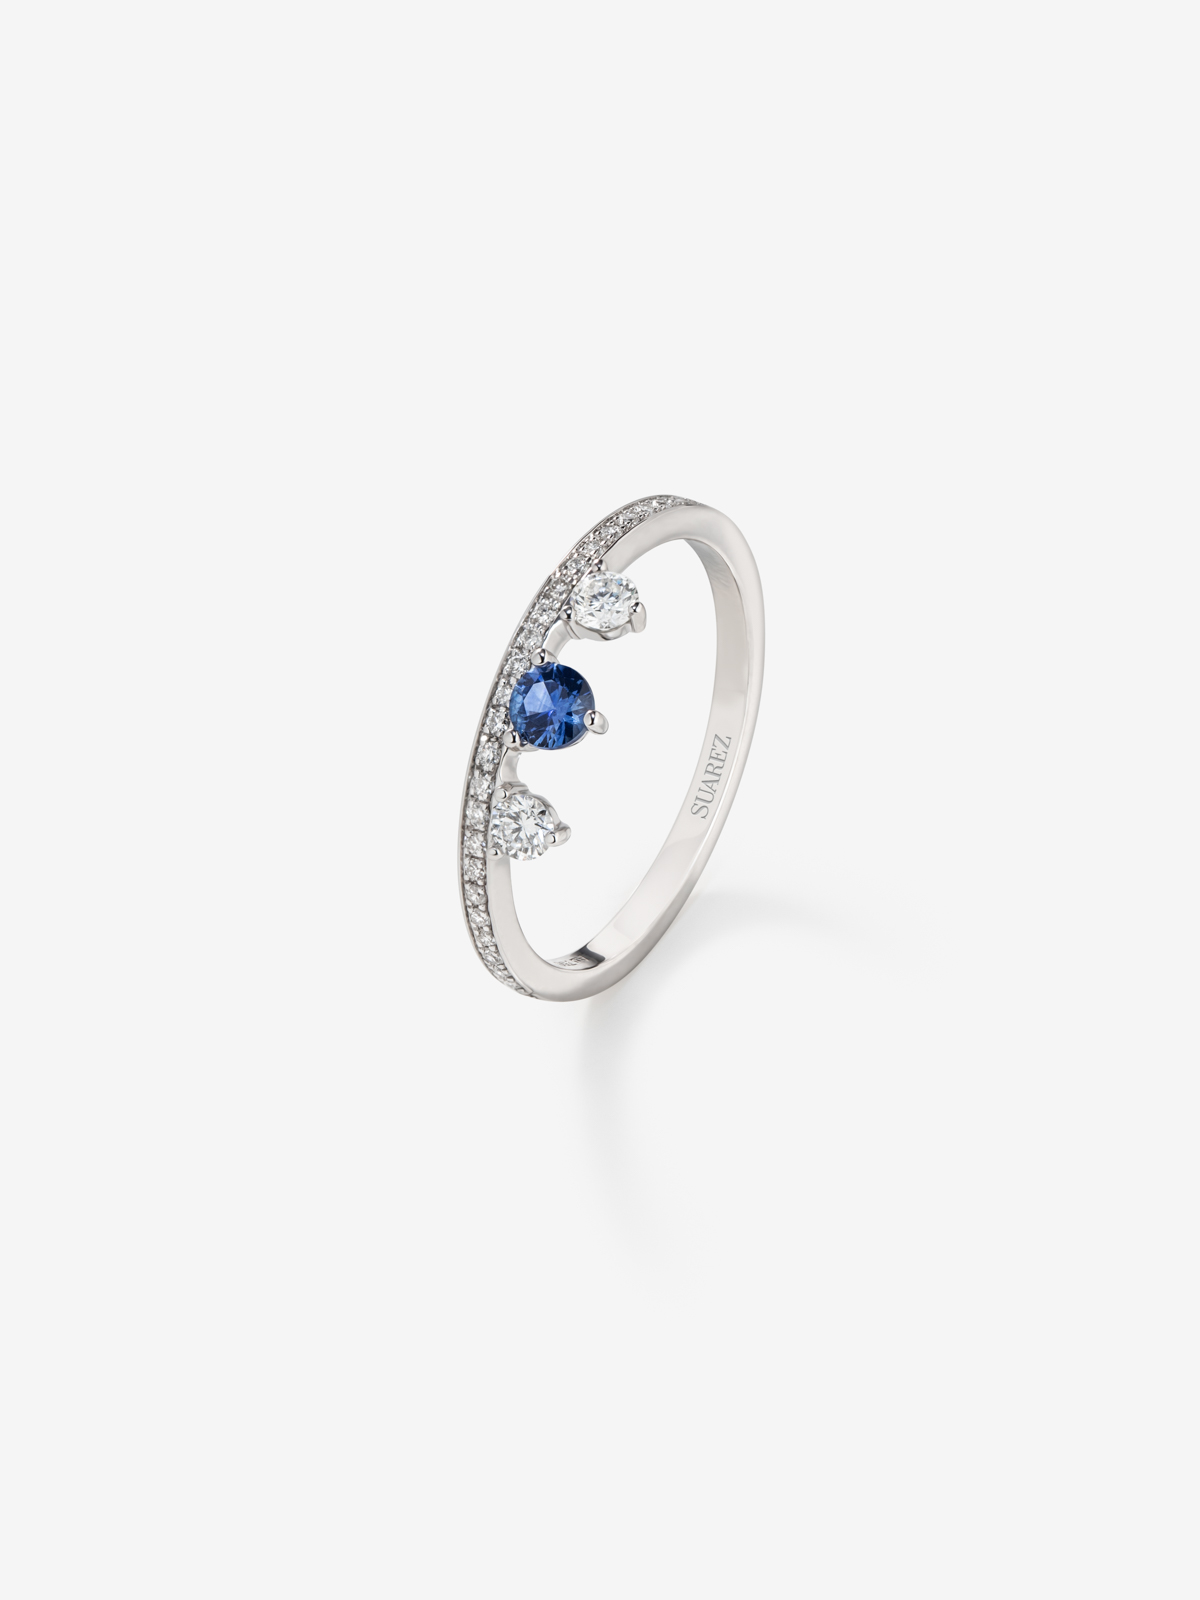 18K white gold ring with sapphire and diamonds